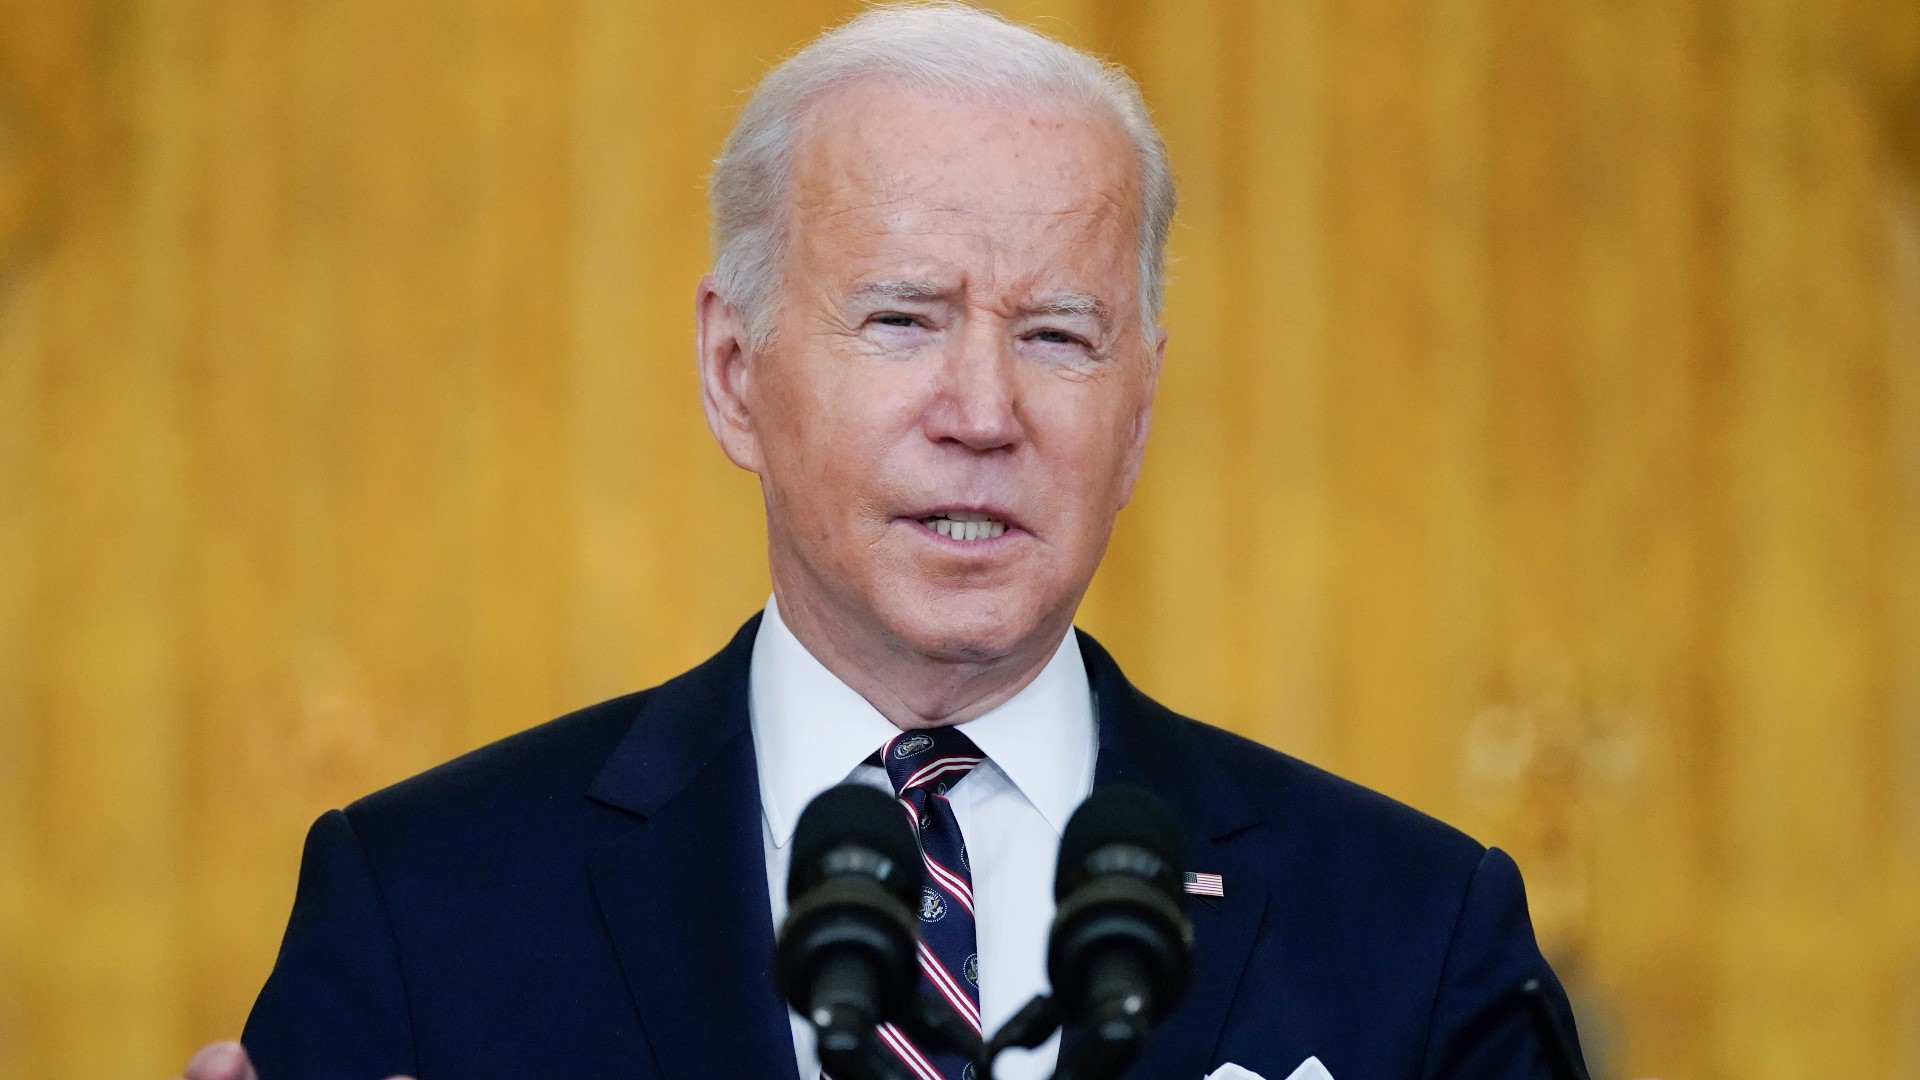 President Joe Biden released a statement Wednesday on the shootings that he said shook communities across America a year ago.